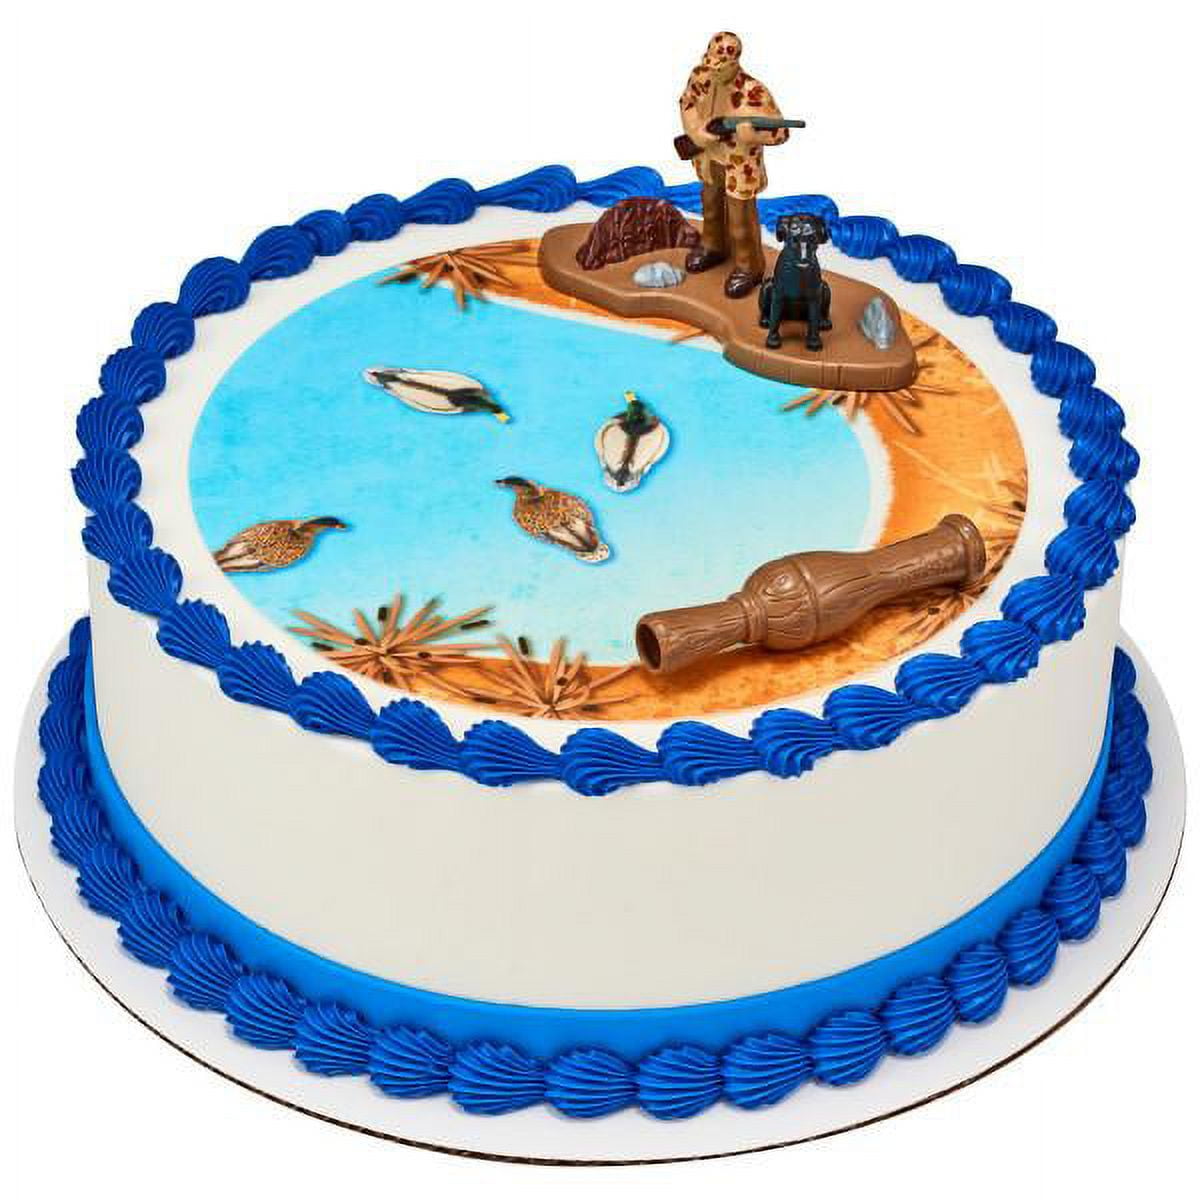 Whimsical Groom's Cake with Hunting Dog Topper